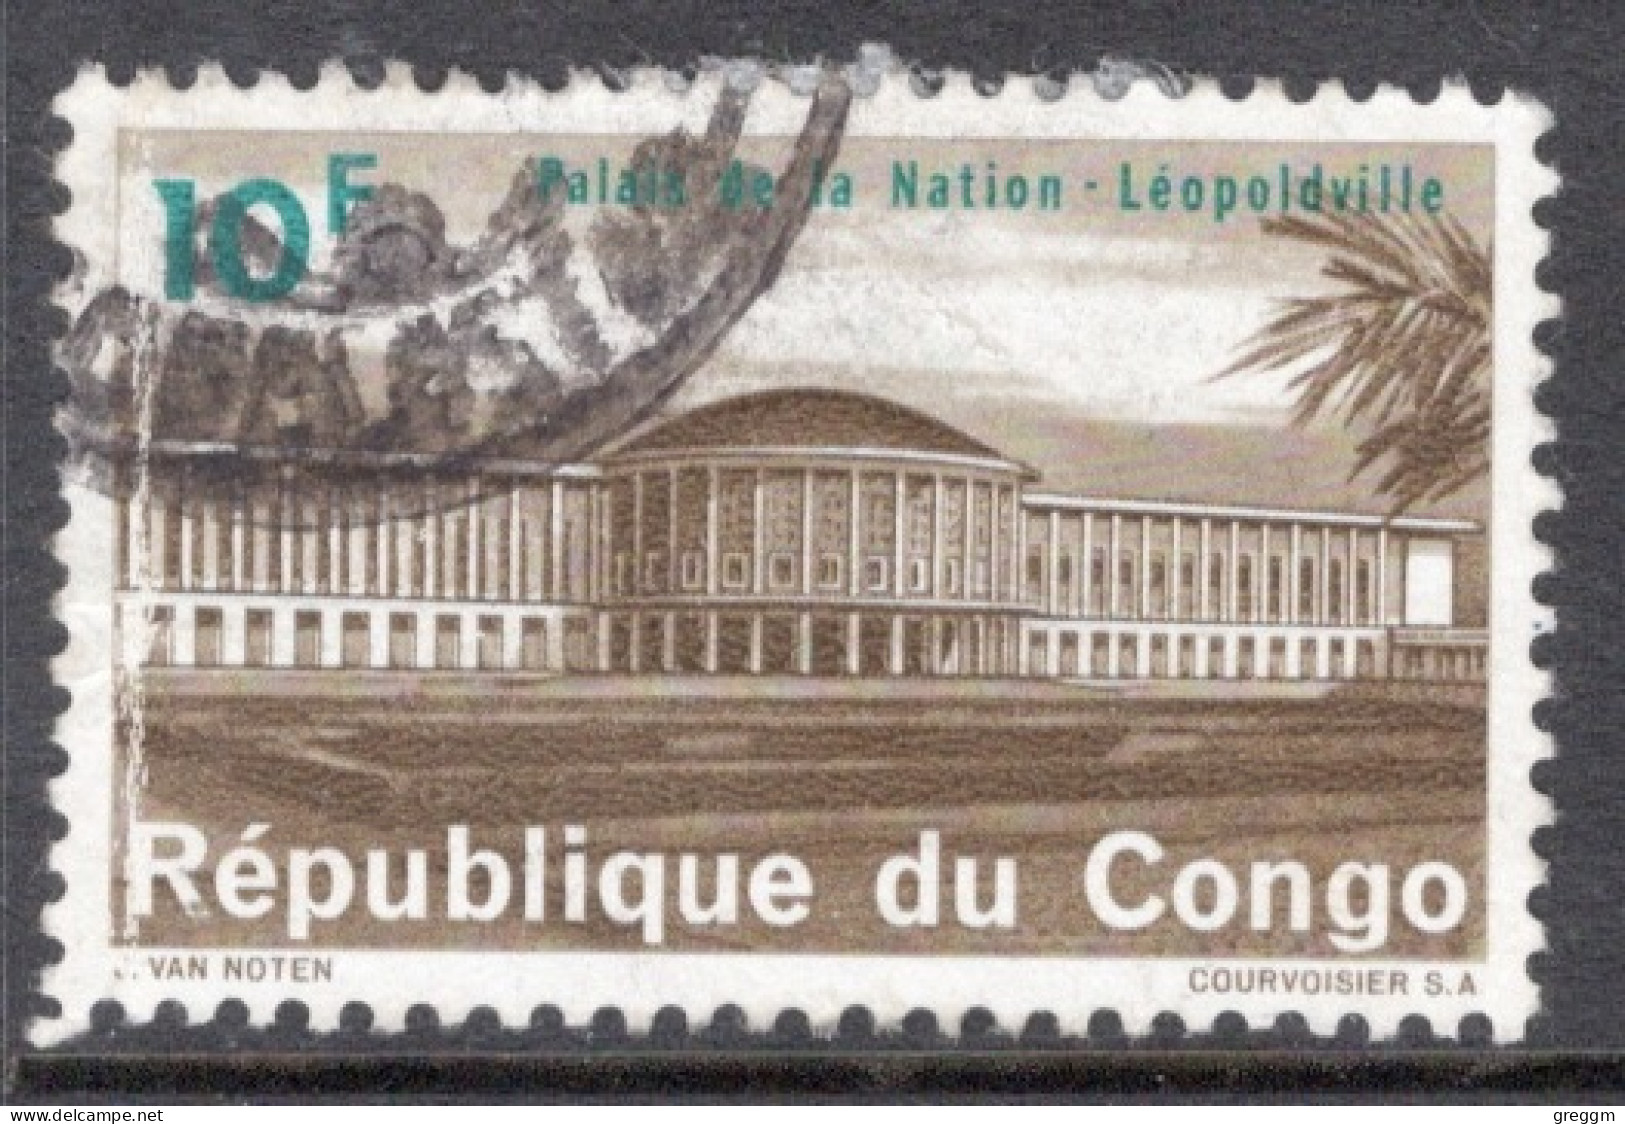 Kinshasa Congo 1964 Single 10f Stamp From The Definitive Set  National Palace, Leopoldville  In Fine Used. - Usados